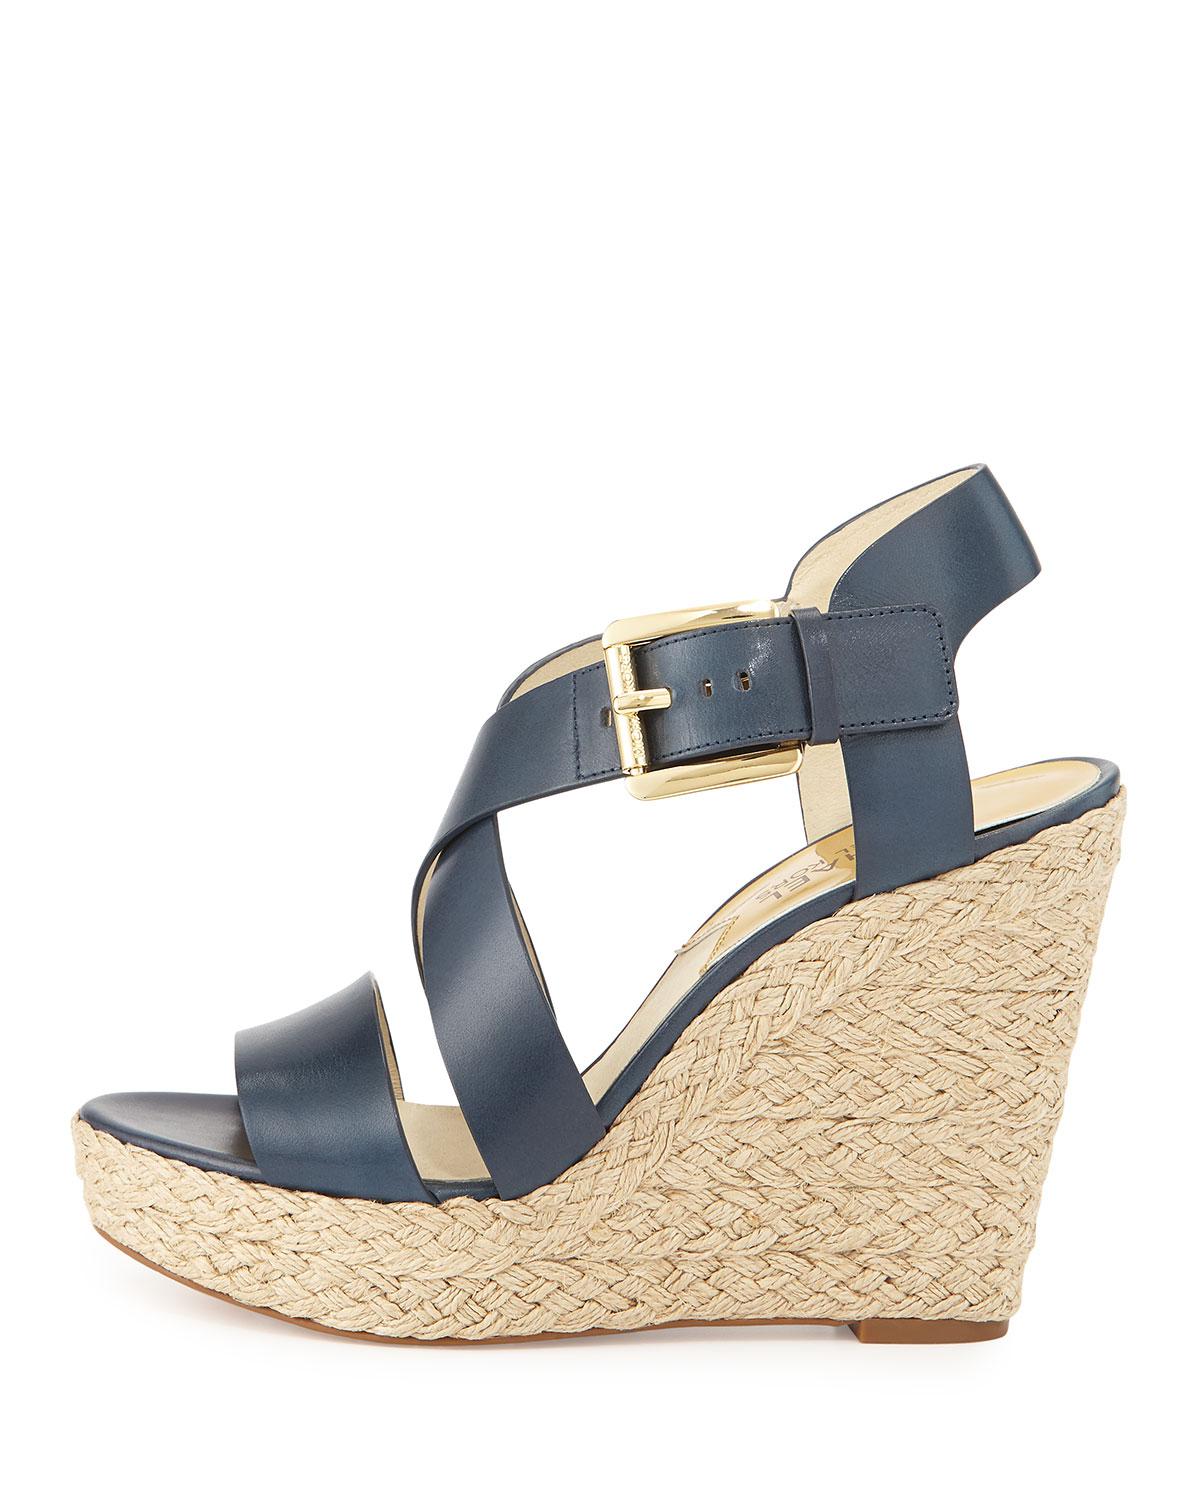 Lyst - Michael Michael Kors Giovanna Leather Espadrille Wedge in Blue